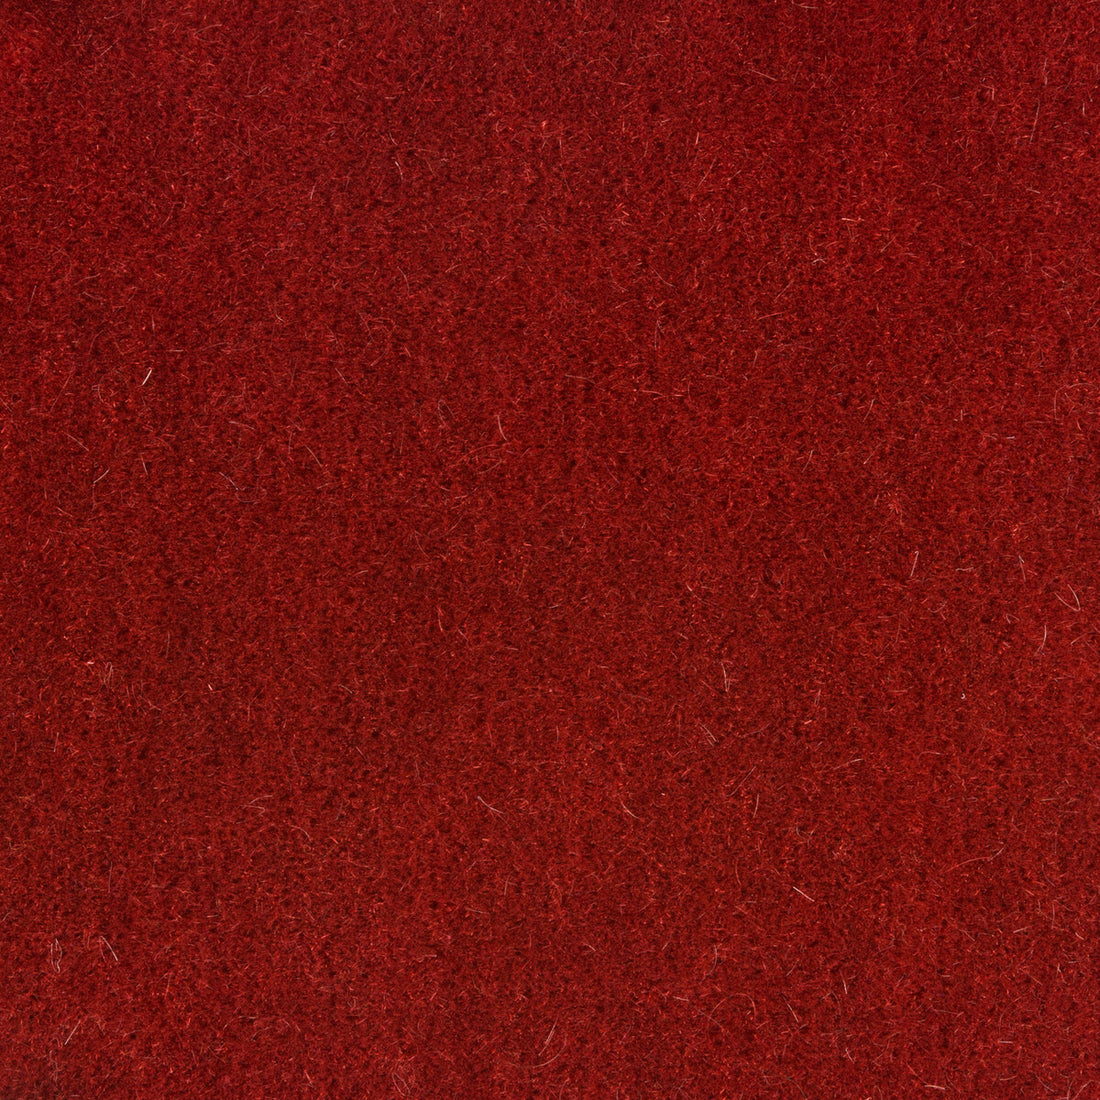 Windsor Mohair fabric in cinnabar color - pattern 34258.19.0 - by Kravet Couture